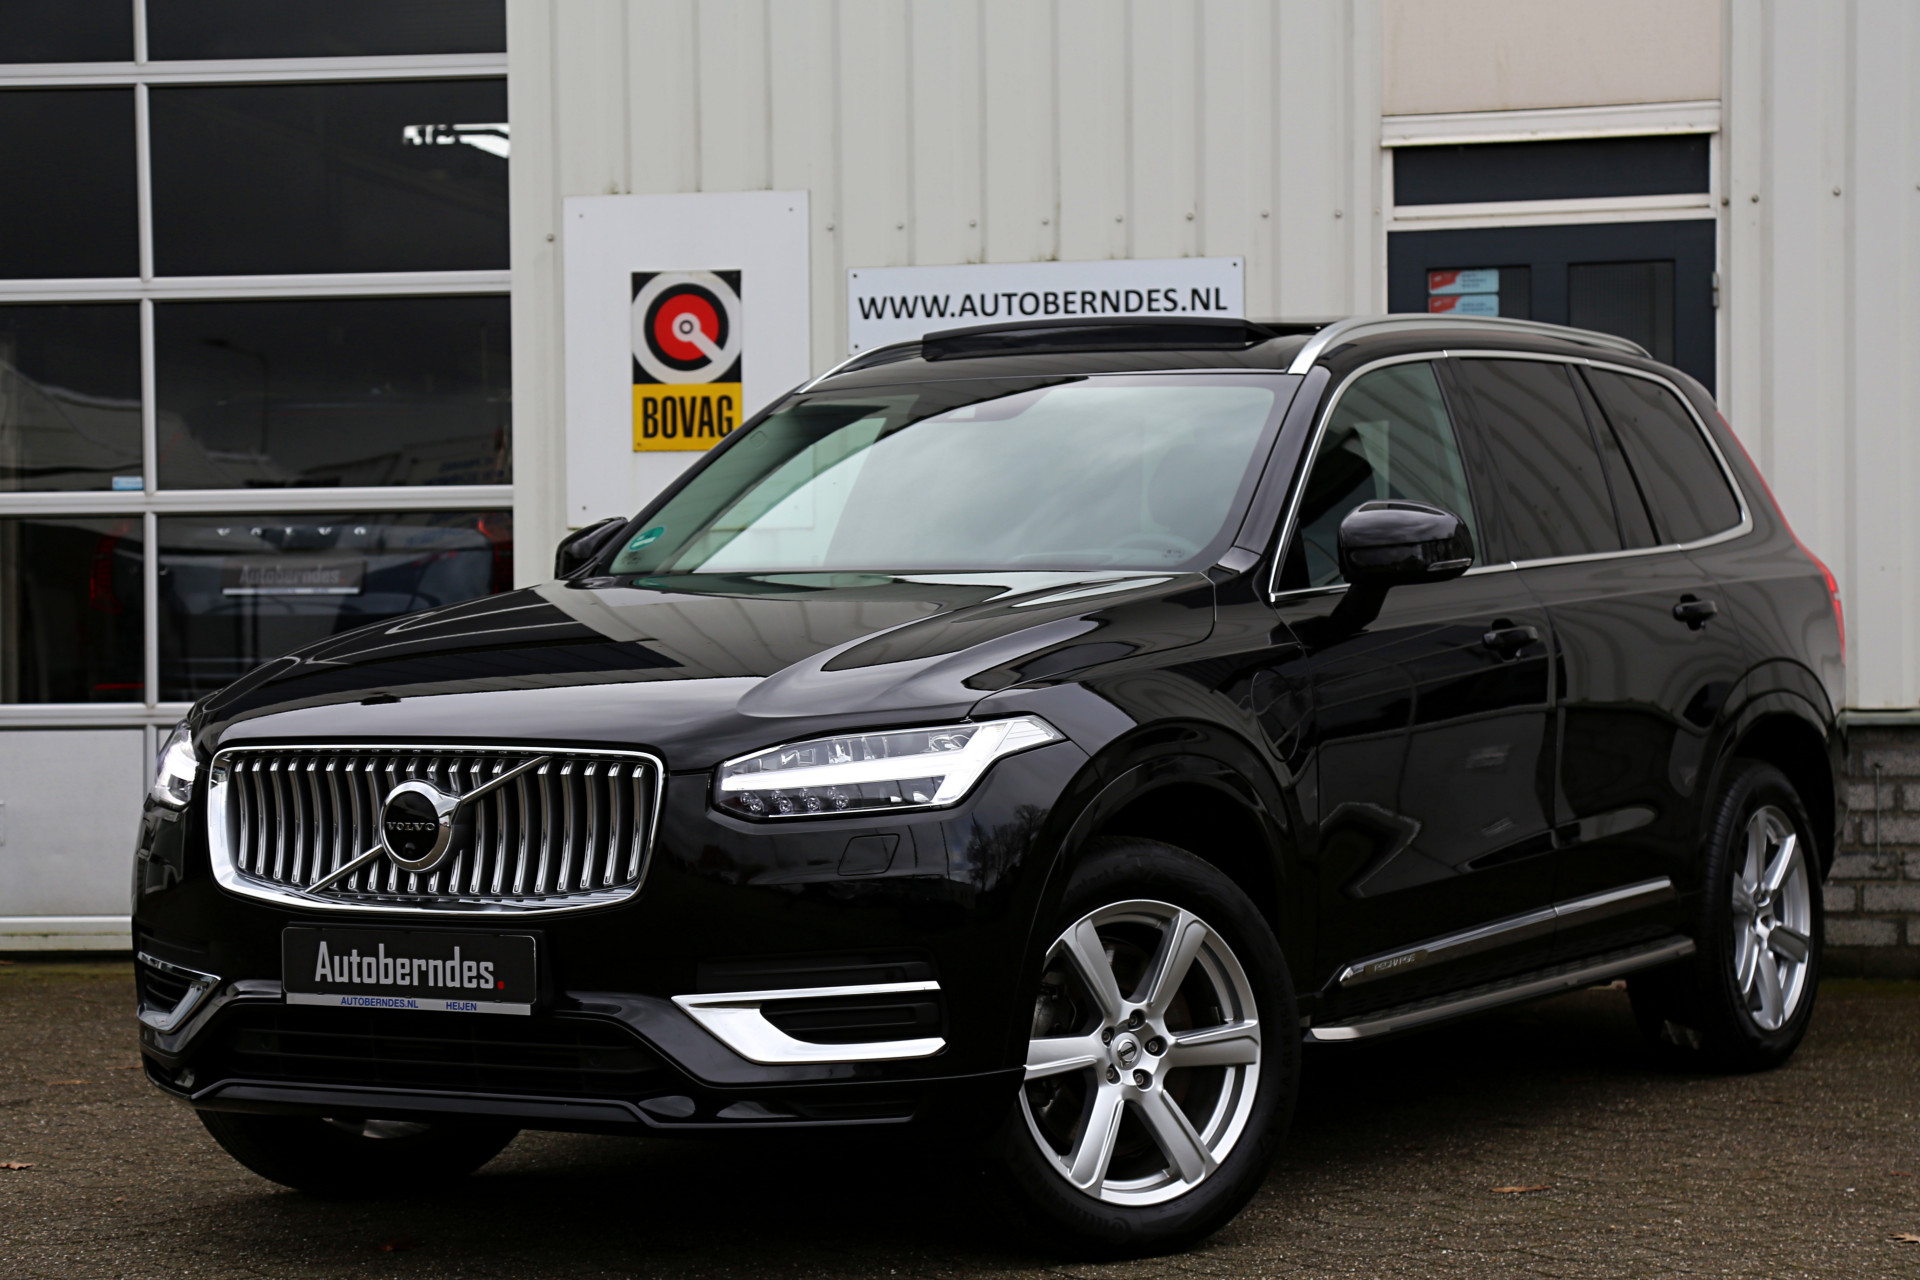 Volvo XC90 2.0 T8 Recharge Plug-in AWD 7P Inscription*Facelift!*Perfect Volvo Onderh.*1ste Eig!*Incl. BTW*Luchtvering/Pano/Elek. Trekhaak/H